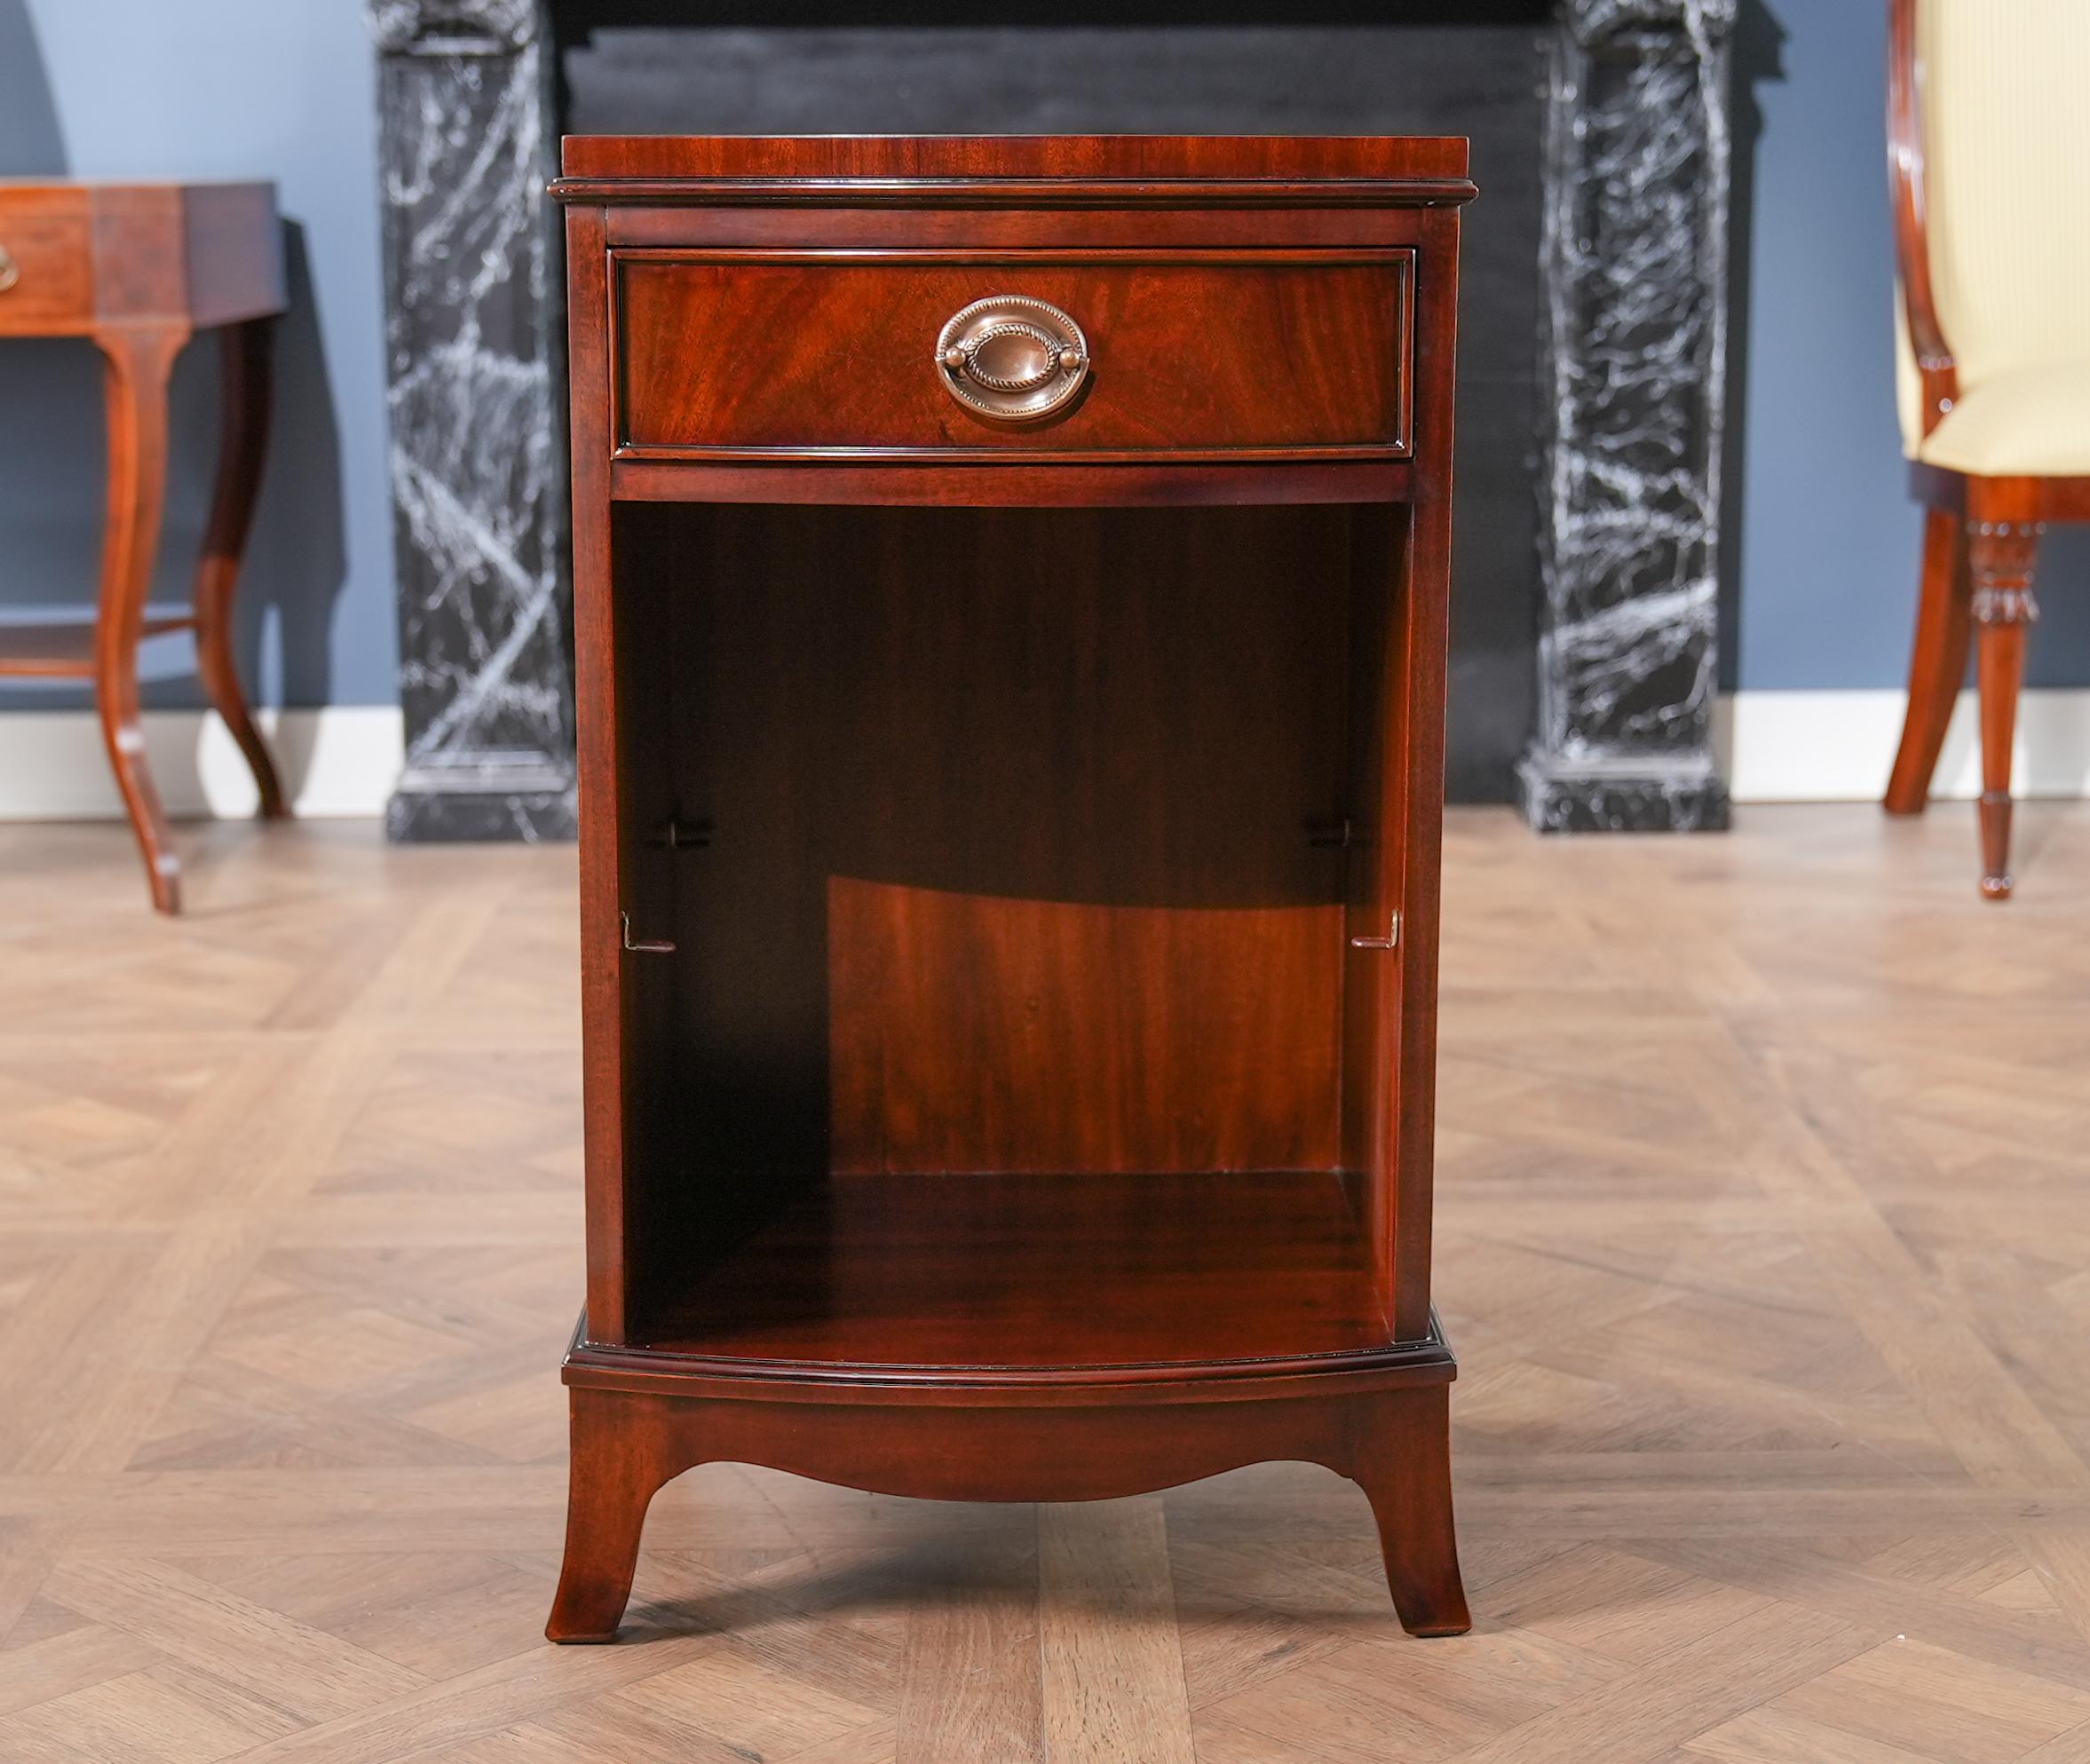 A fine quality Mahogany One Drawer Nightstand featuring hand shaped, solid mahogany details as well as dovetailed drawers. The bowed front creates a beautiful shape, and the single drawers create, and shelf creates a lot of practical storage in a